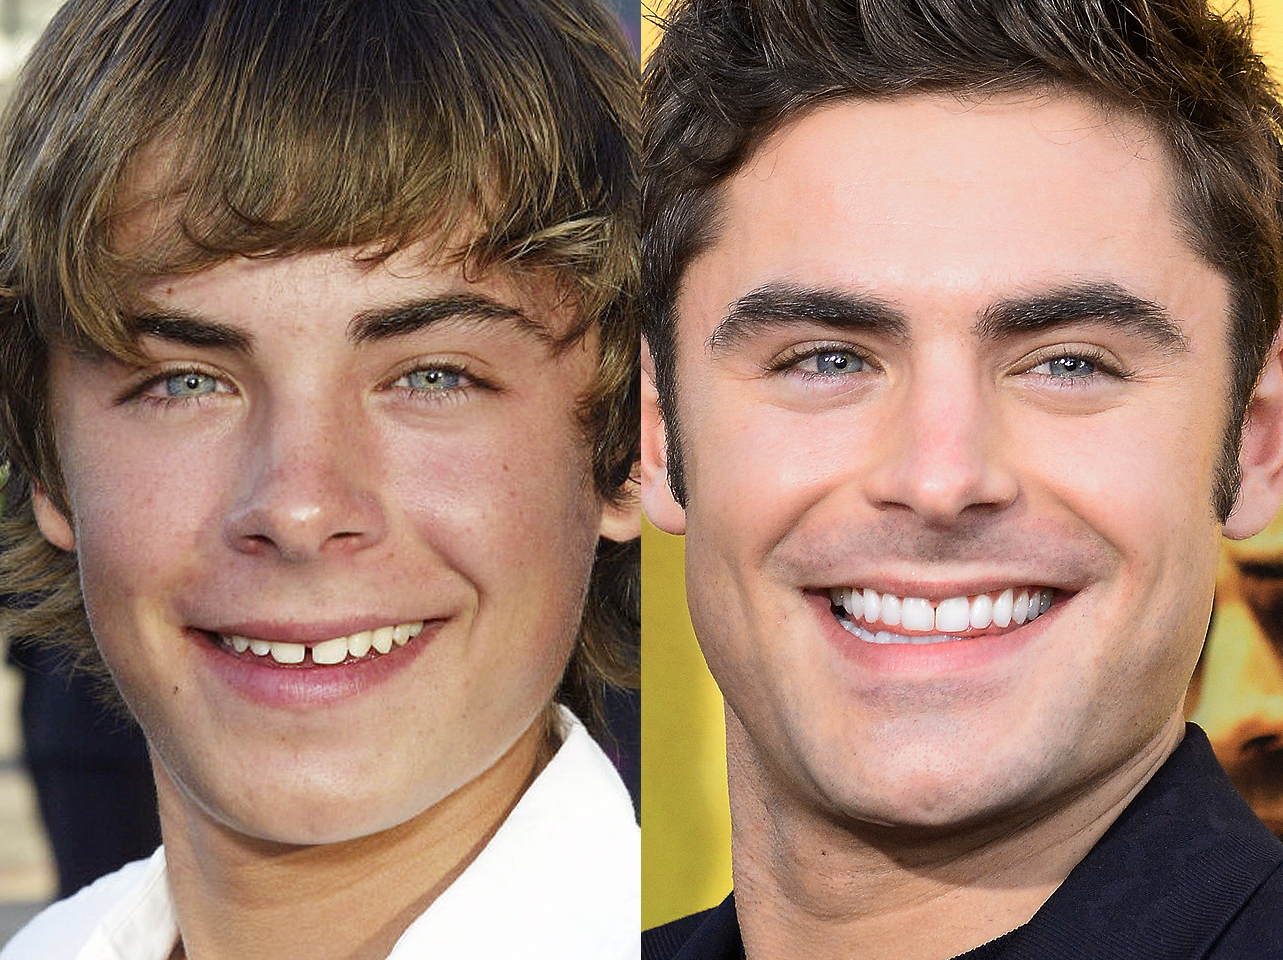 A before and after of Zac Efron's smile. | Source: Getty Images